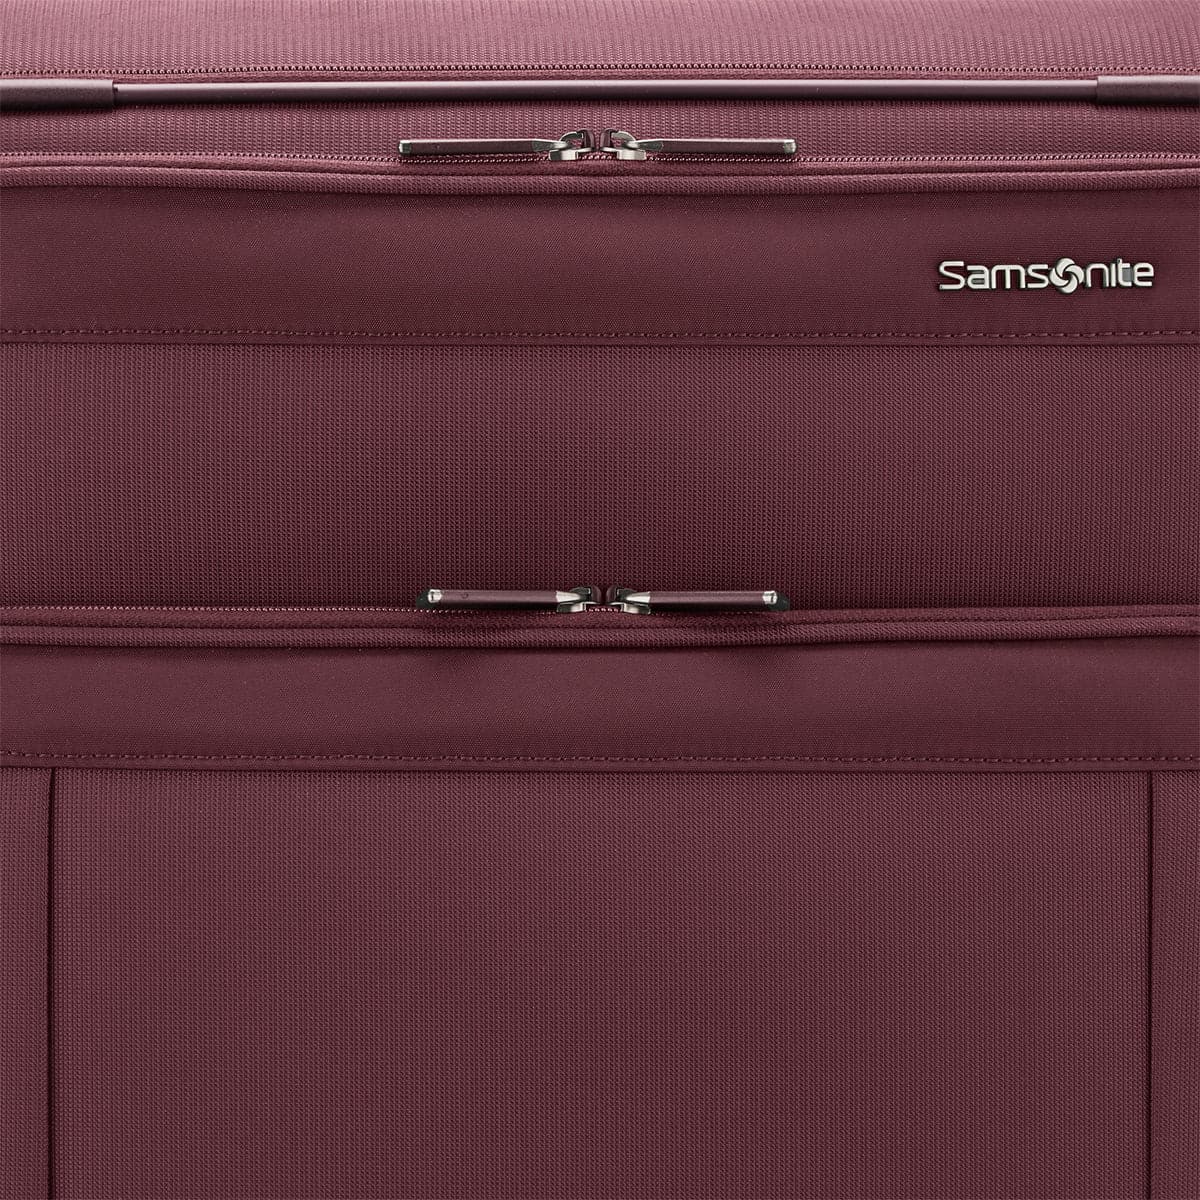 Samsonite Lineate DLX Large Expandable Spinner